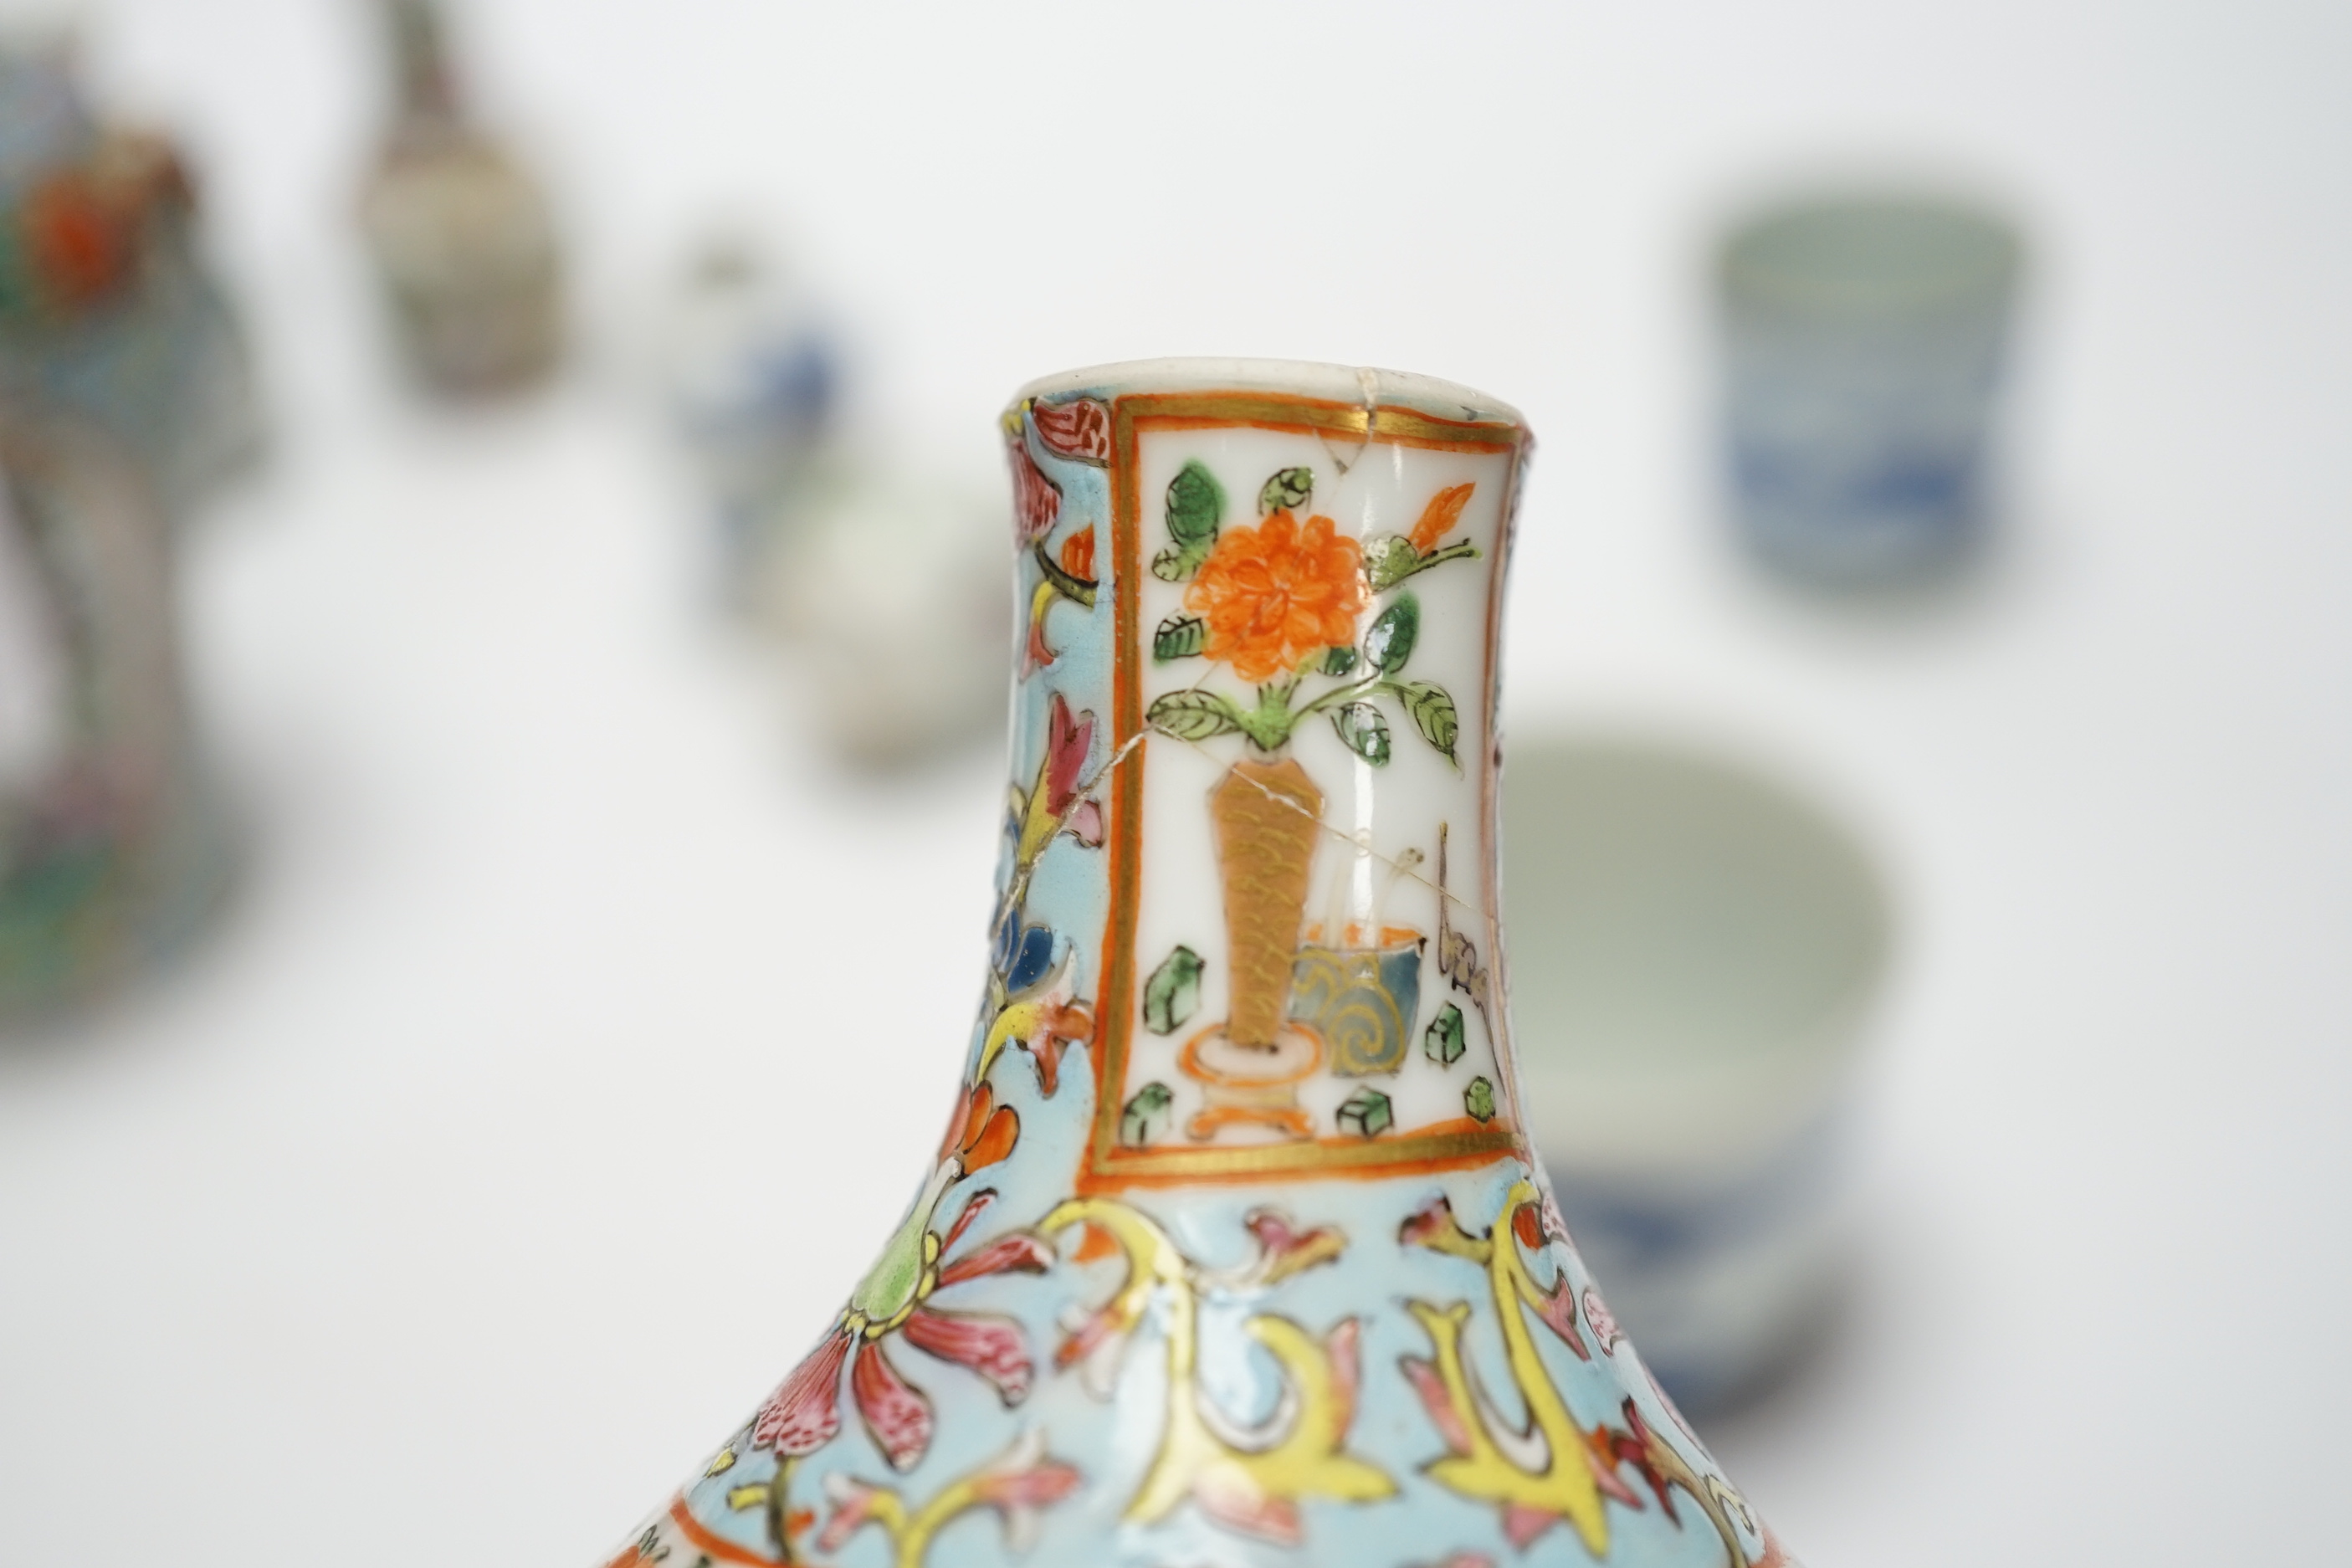 A group of Chinese famille rose small vases and blue and white items, late 19th/early 20th century (8) tallest 16cm